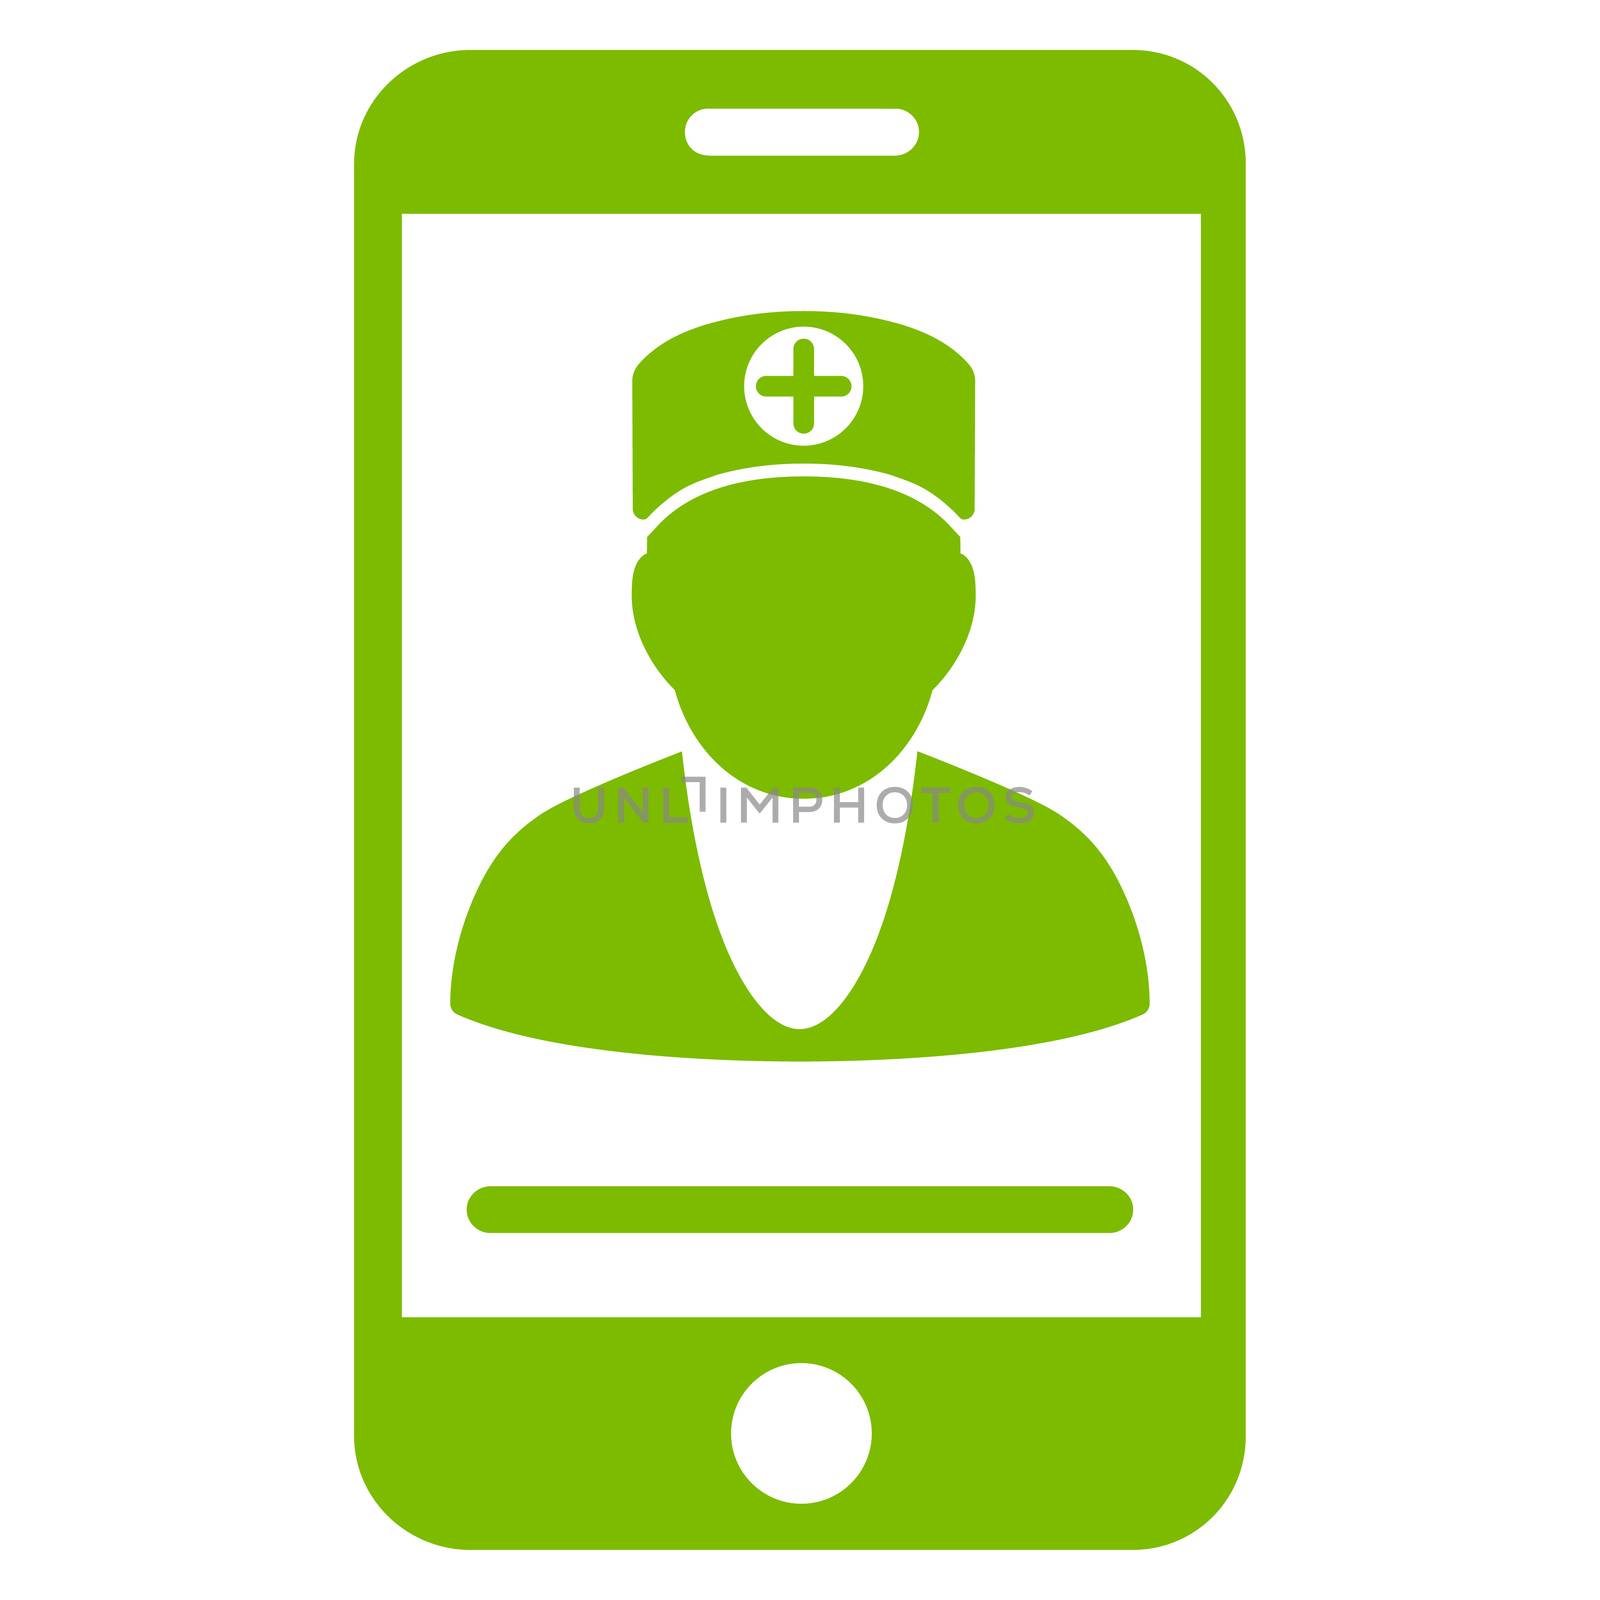 Online Doctor raster icon. Style is flat symbol, eco green color, rounded angles, white background.